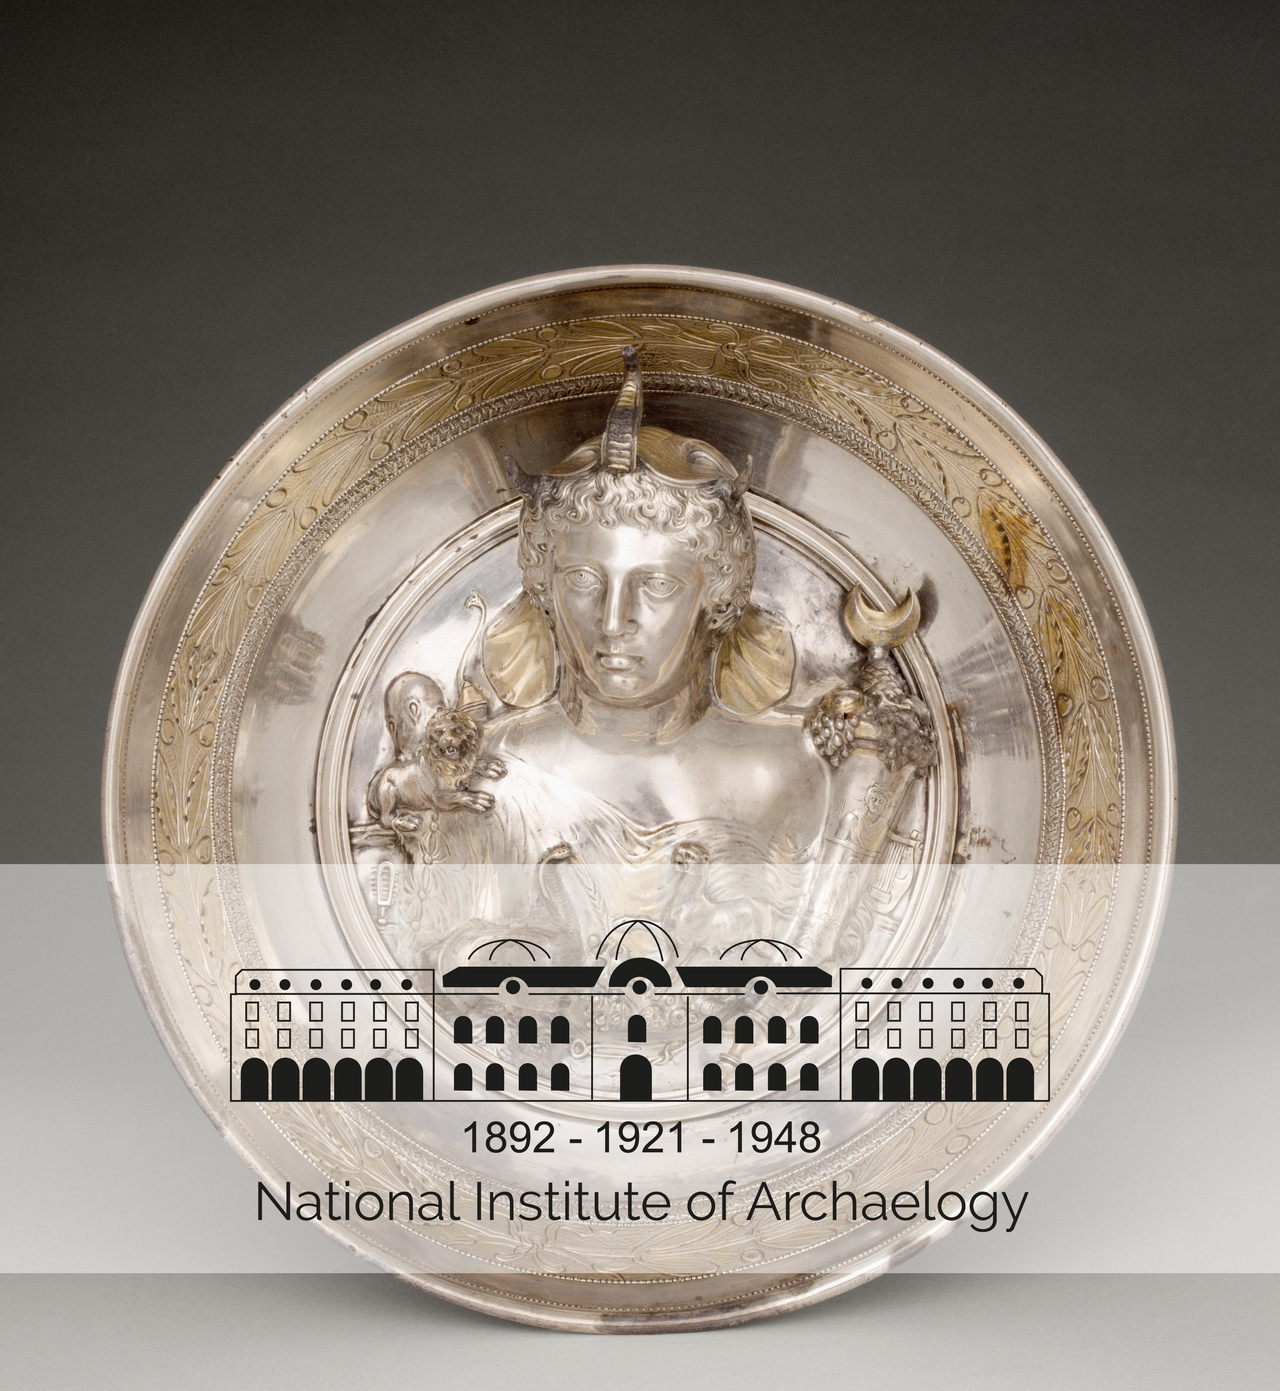 National Institute of Archaelogy